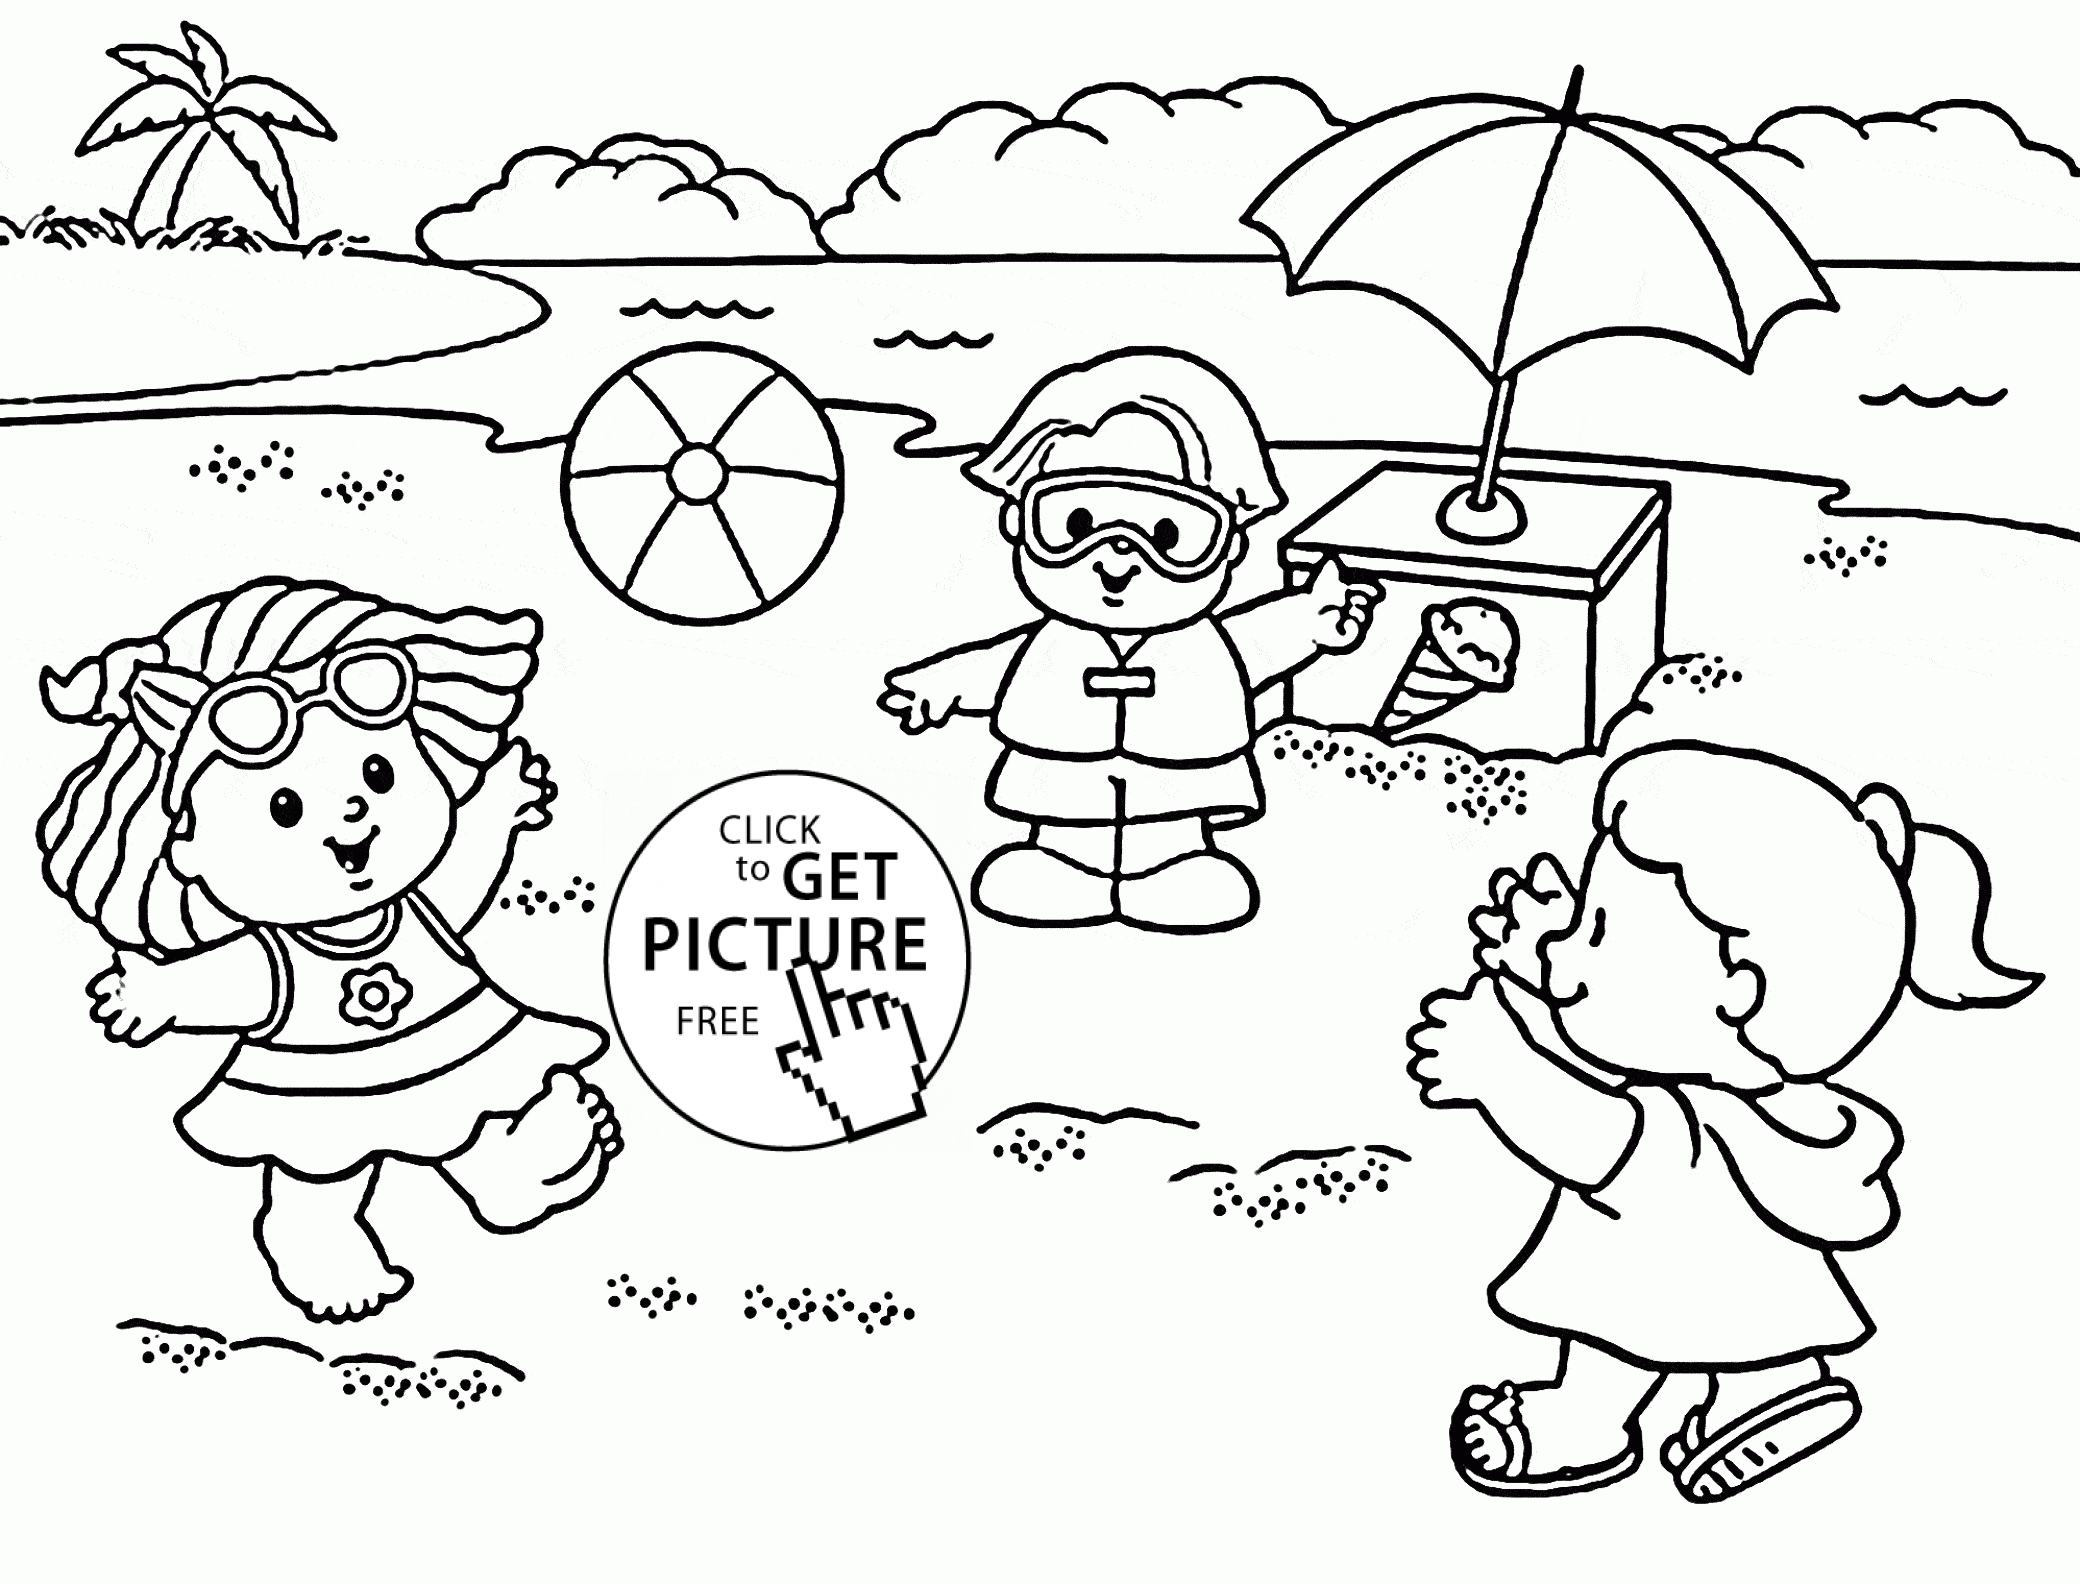 summer fun coloring page coloring home